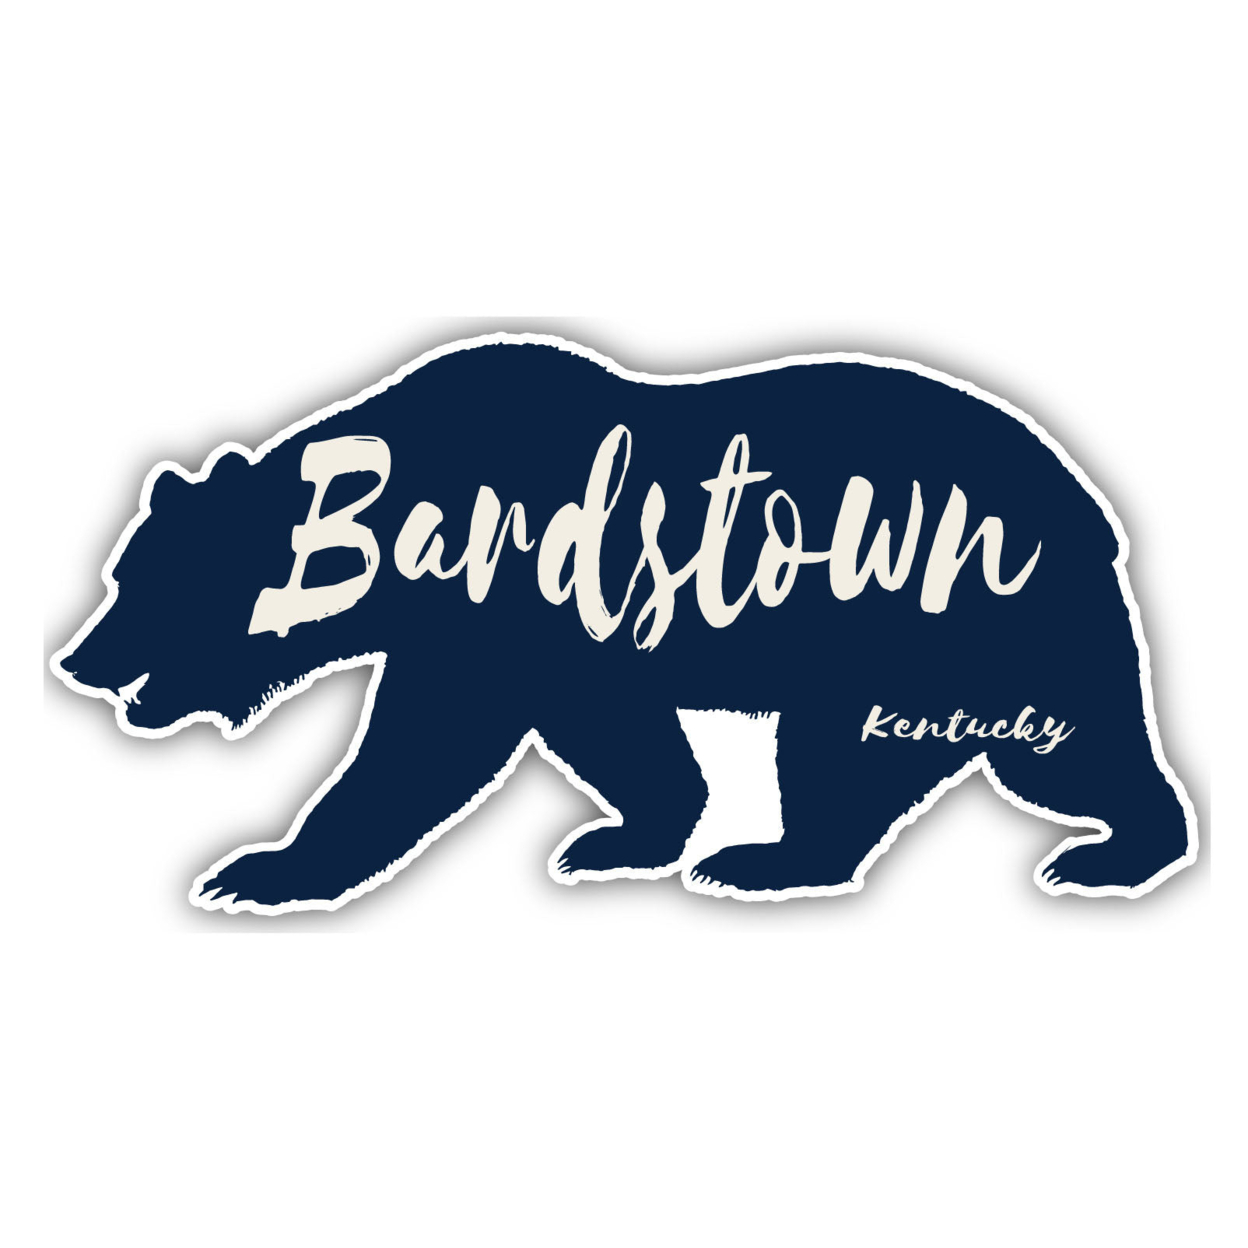 Bardstown Kentucky Souvenir Decorative Stickers (Choose Theme And Size) - 4-Pack, 8-Inch, Great Outdoors